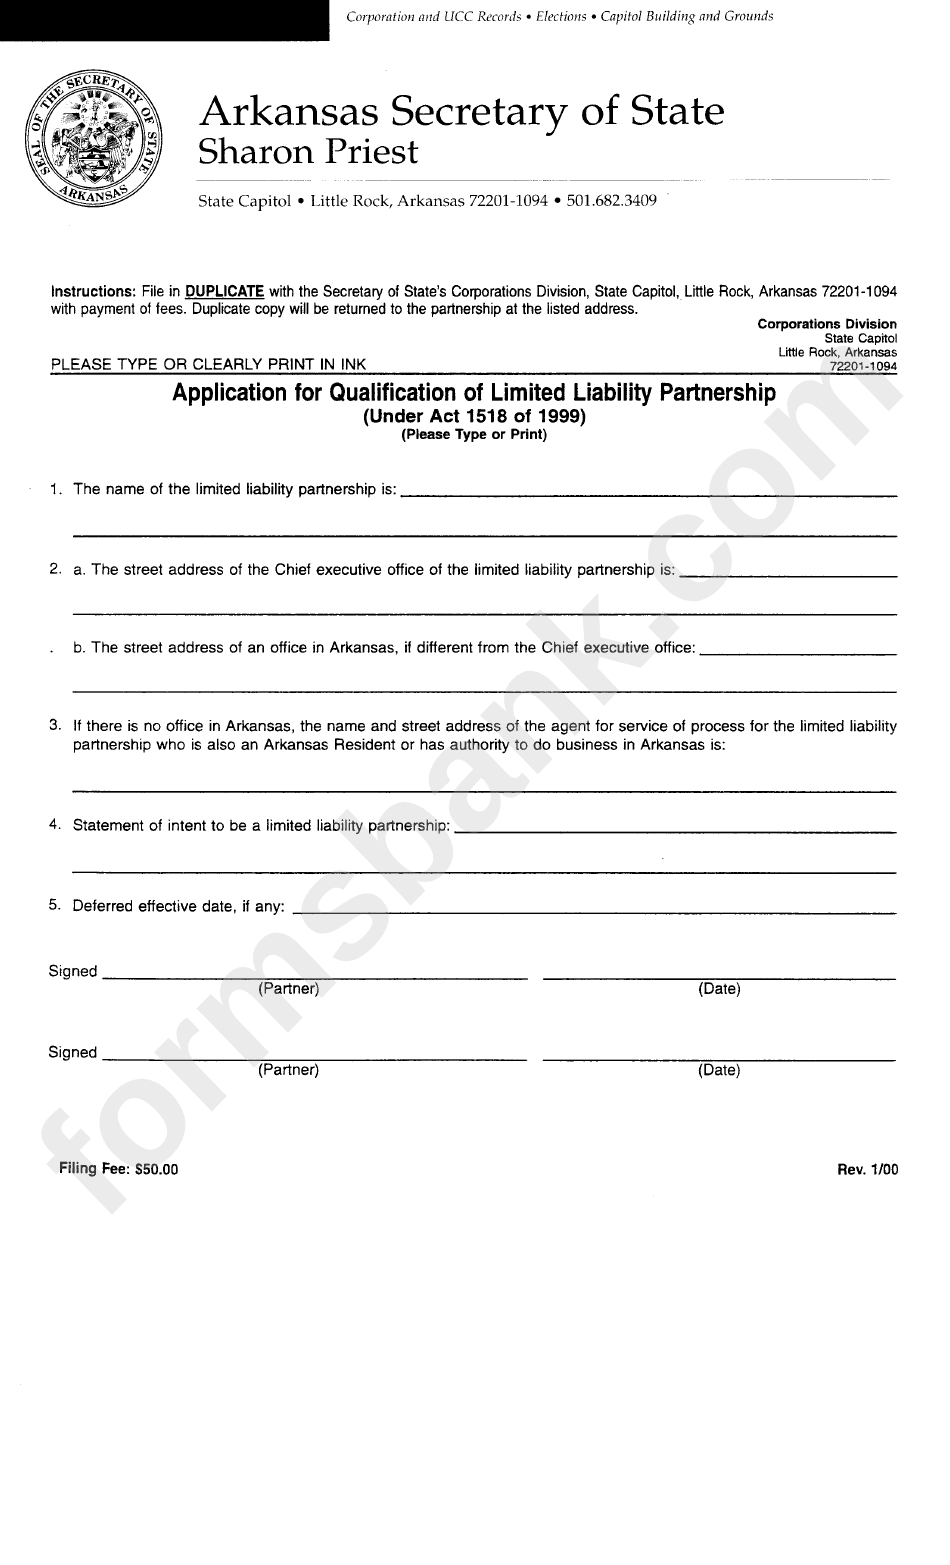 Application For Qualification Of Limited Liability Partnership Form